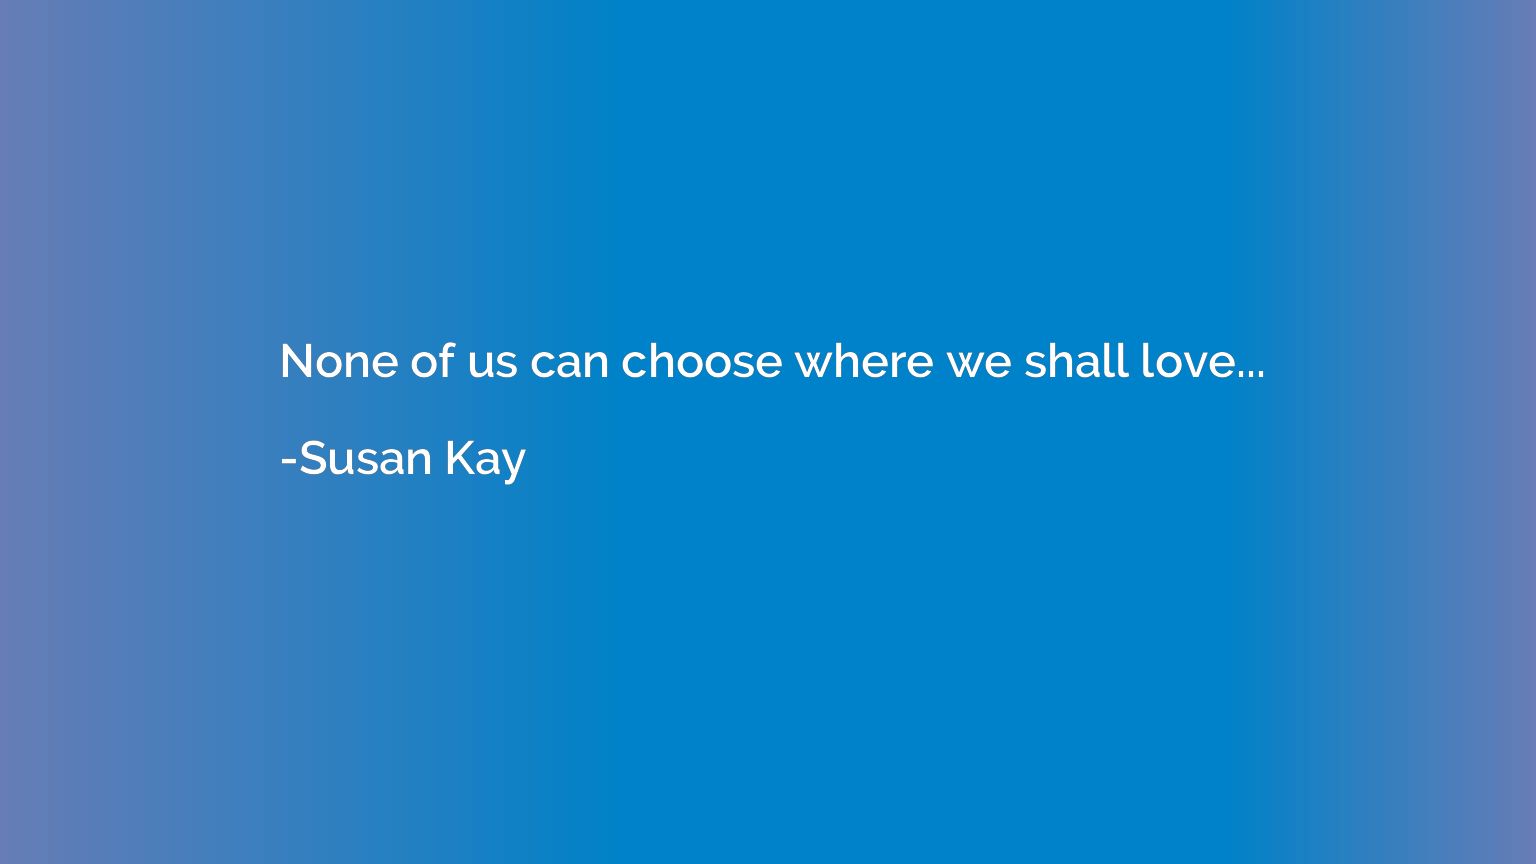 None of us can choose where we shall love...